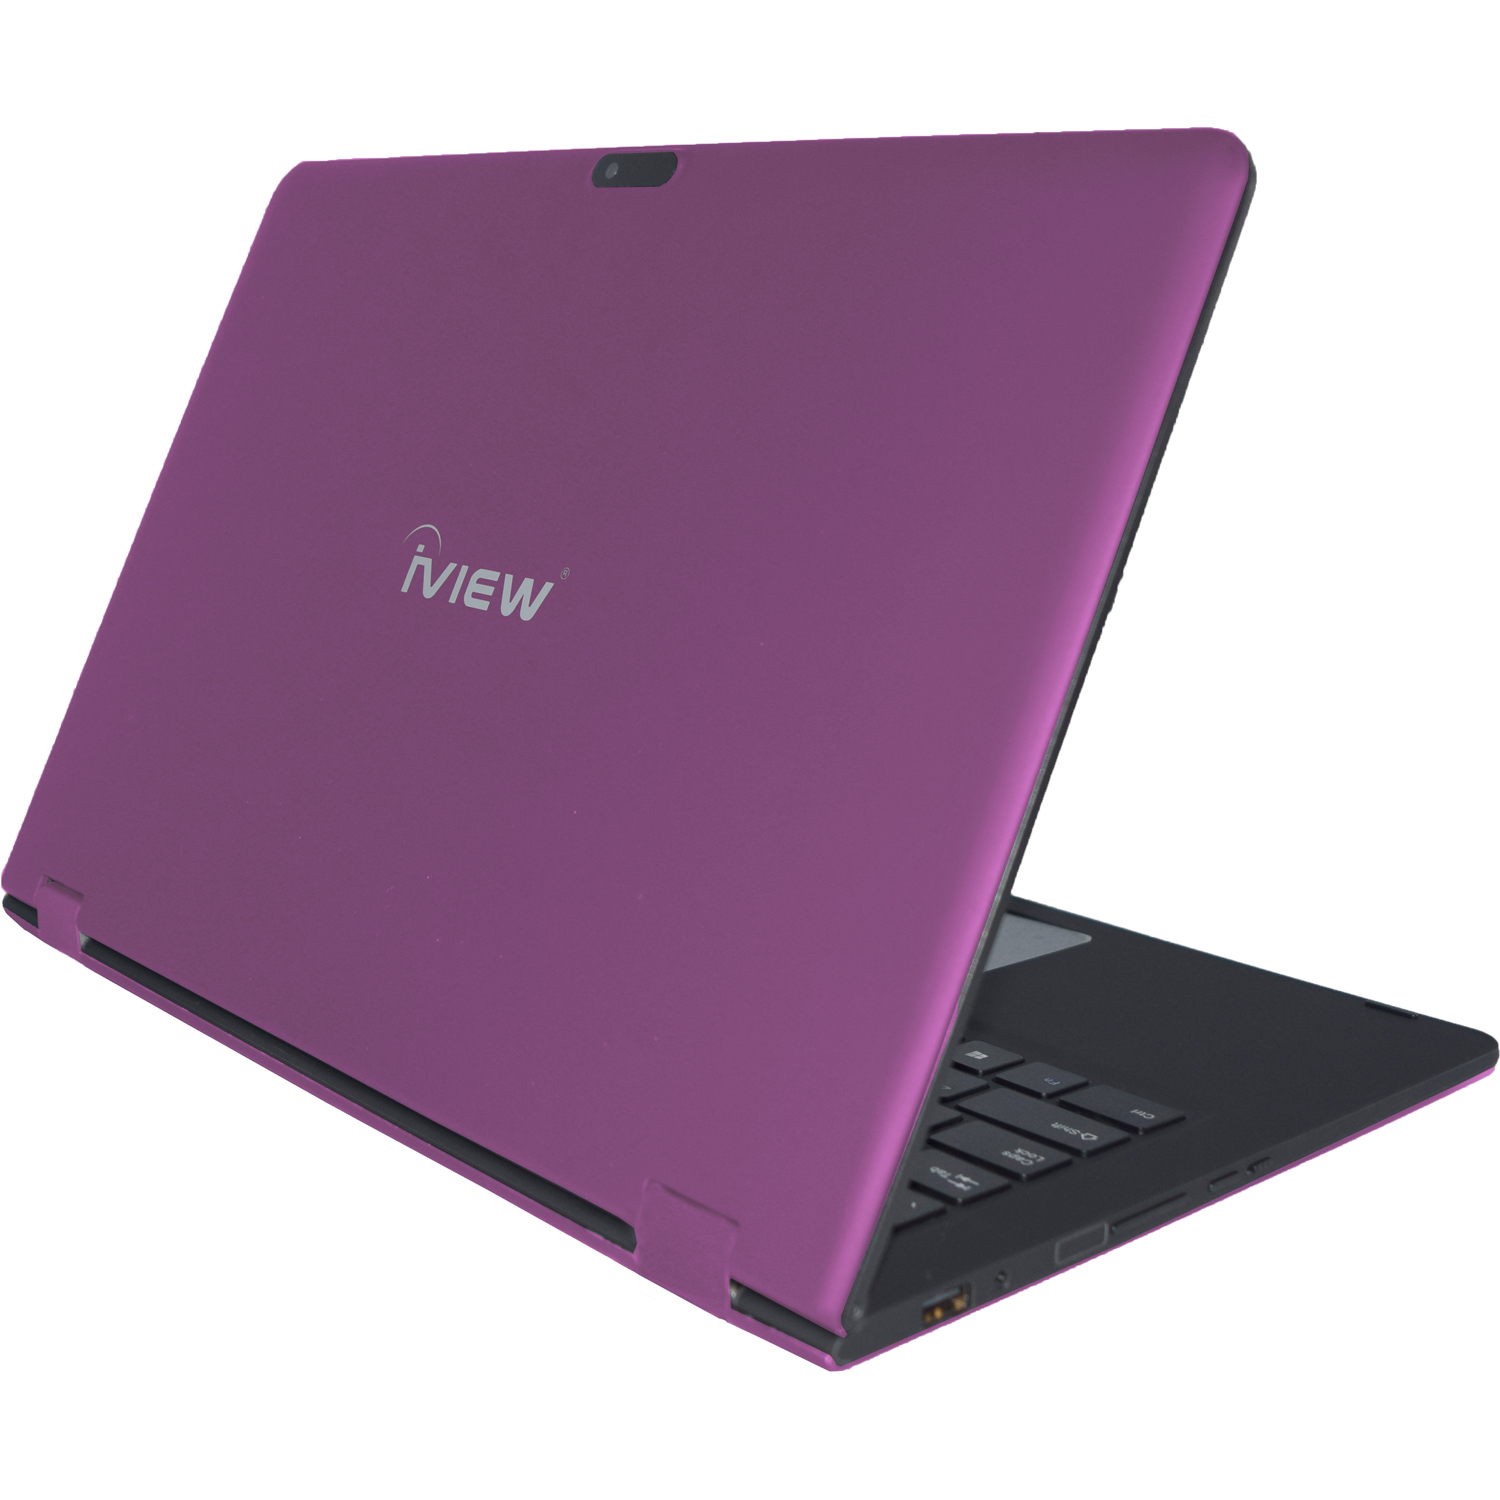 iView MEGATRON II - 14.1" Convertible Touchscreen Laptop (2 in 1) with Windows 10, Intel Atom Processor, 2GB memory, 32GB storage, 2MP Front Camera and 5MP Rear Camera, 10 hour battery - Pink - image 3 of 3